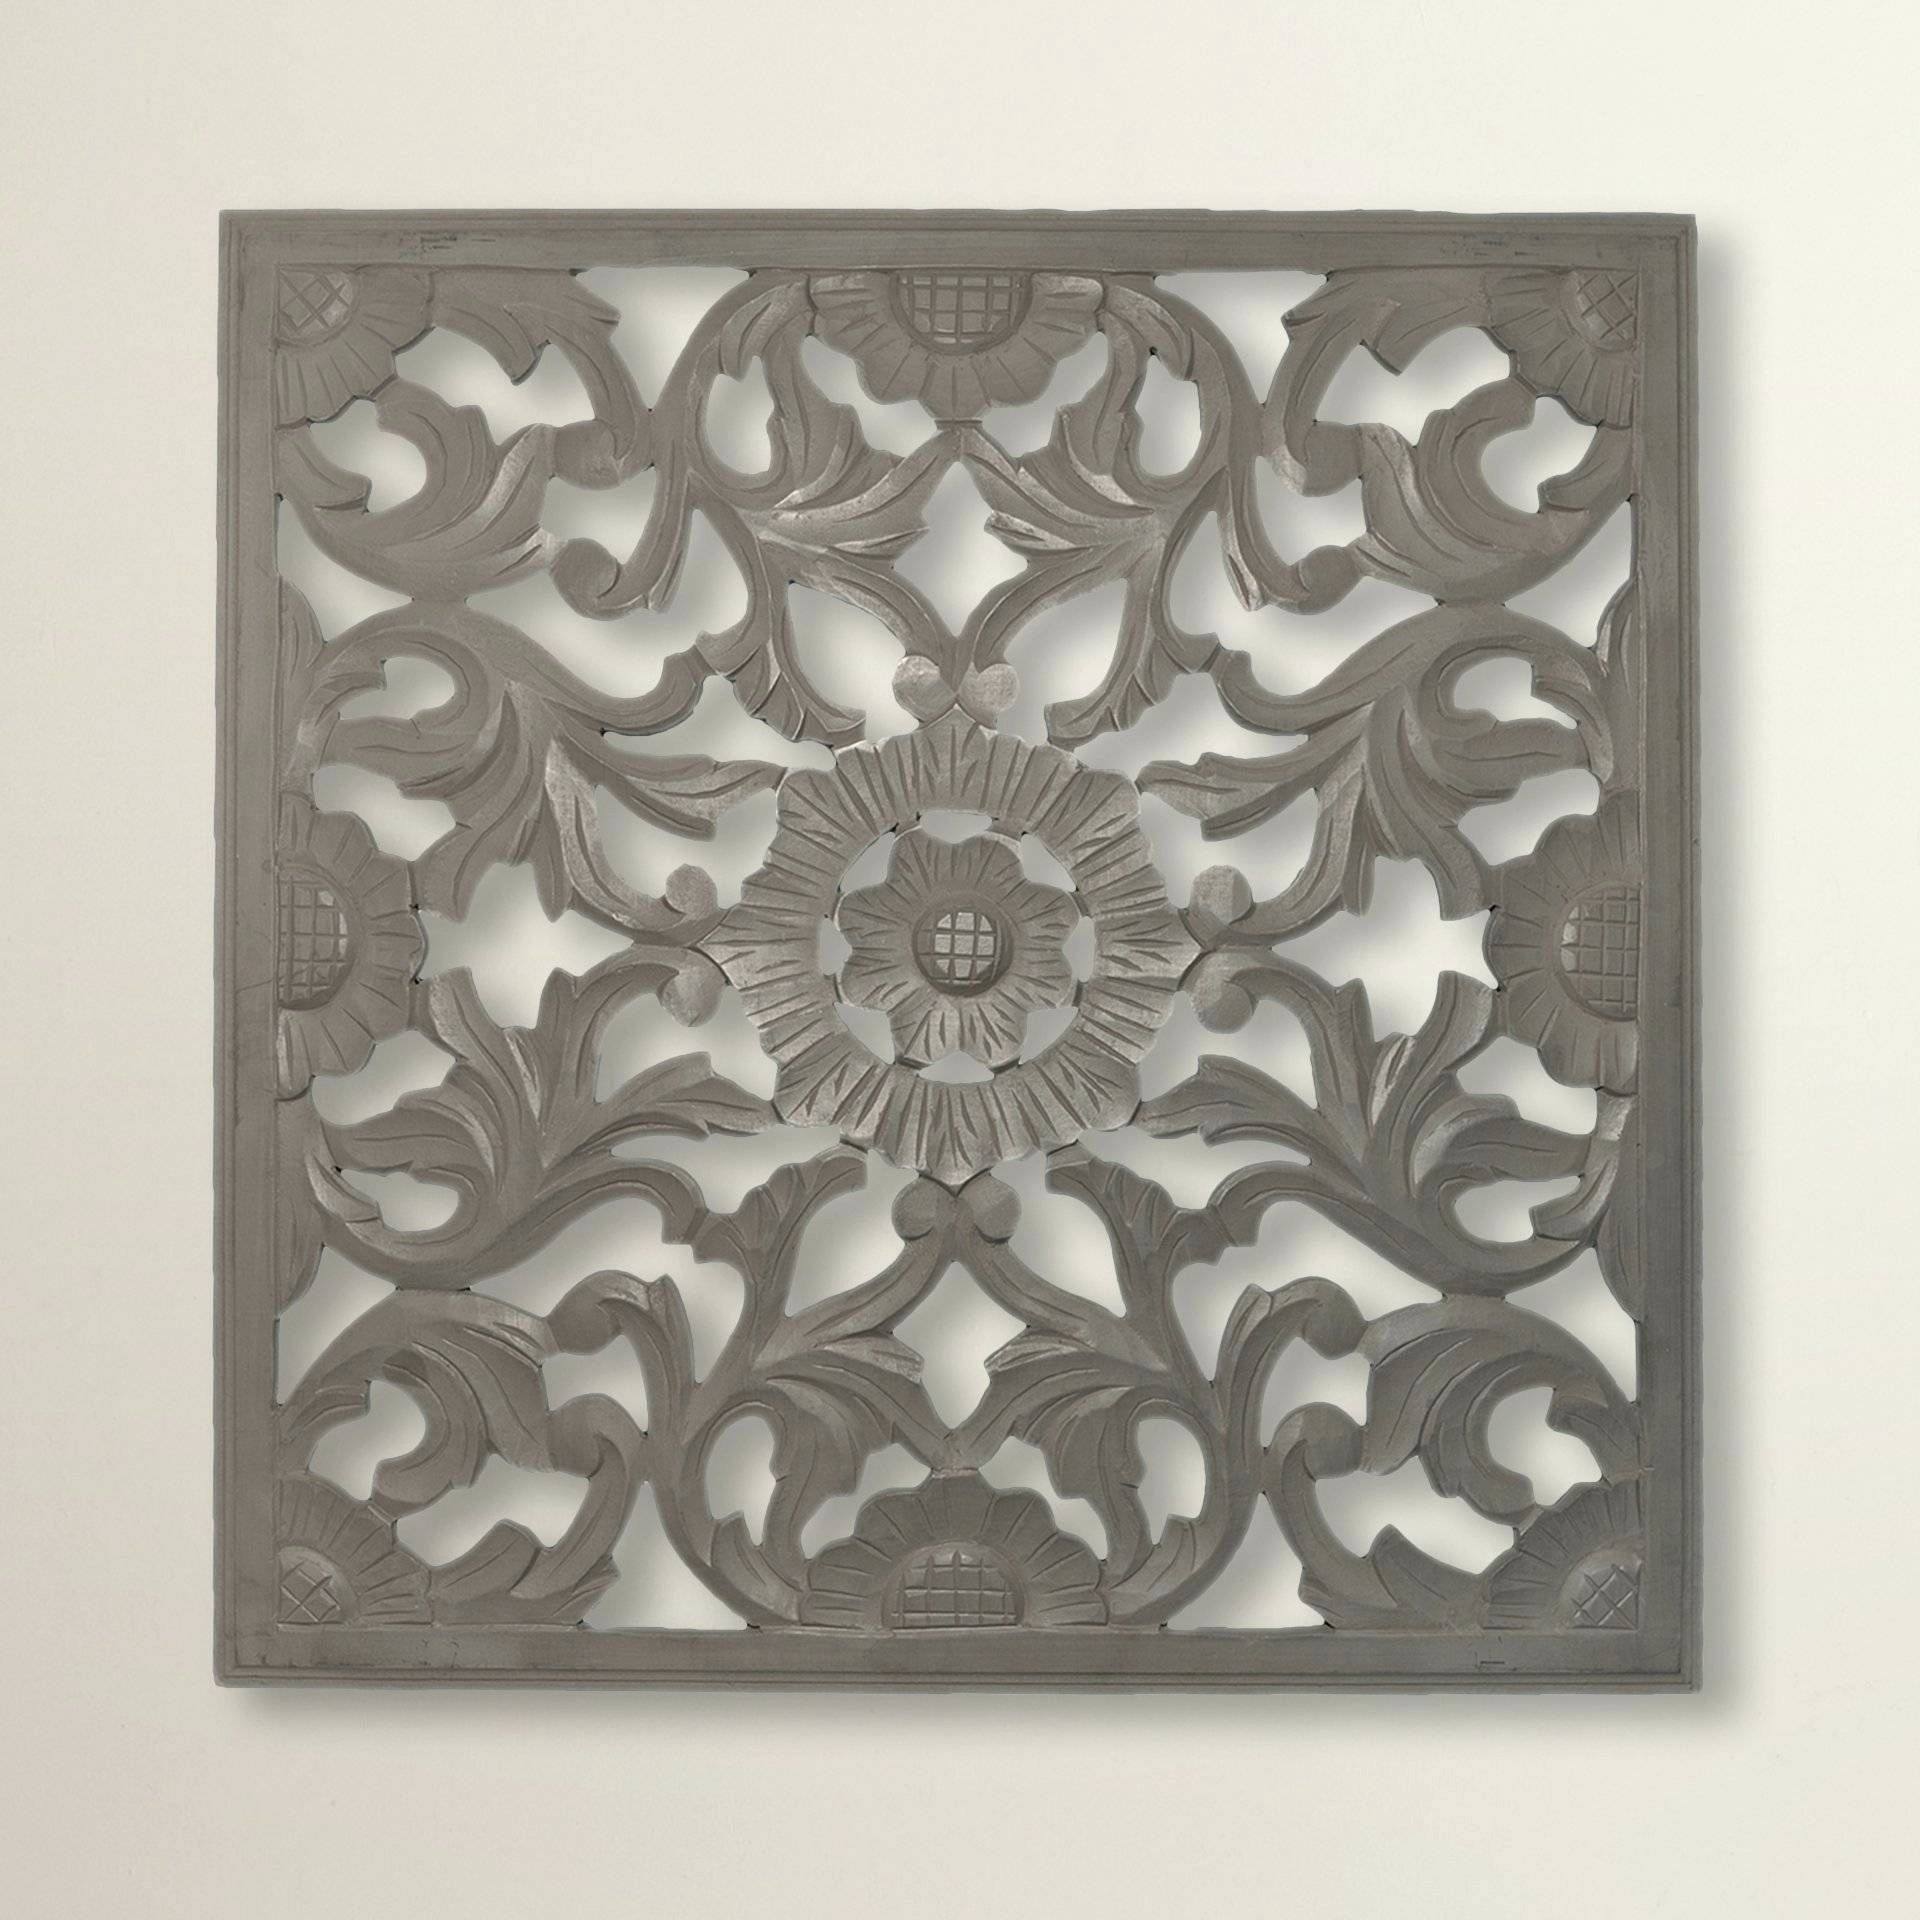 Wall Arts ~ Chic Rustic Metal Wall Art Rustic Wall Decor Awesome With Regard To Most Recently Released White Metal Wall Art (Gallery 17 of 20)